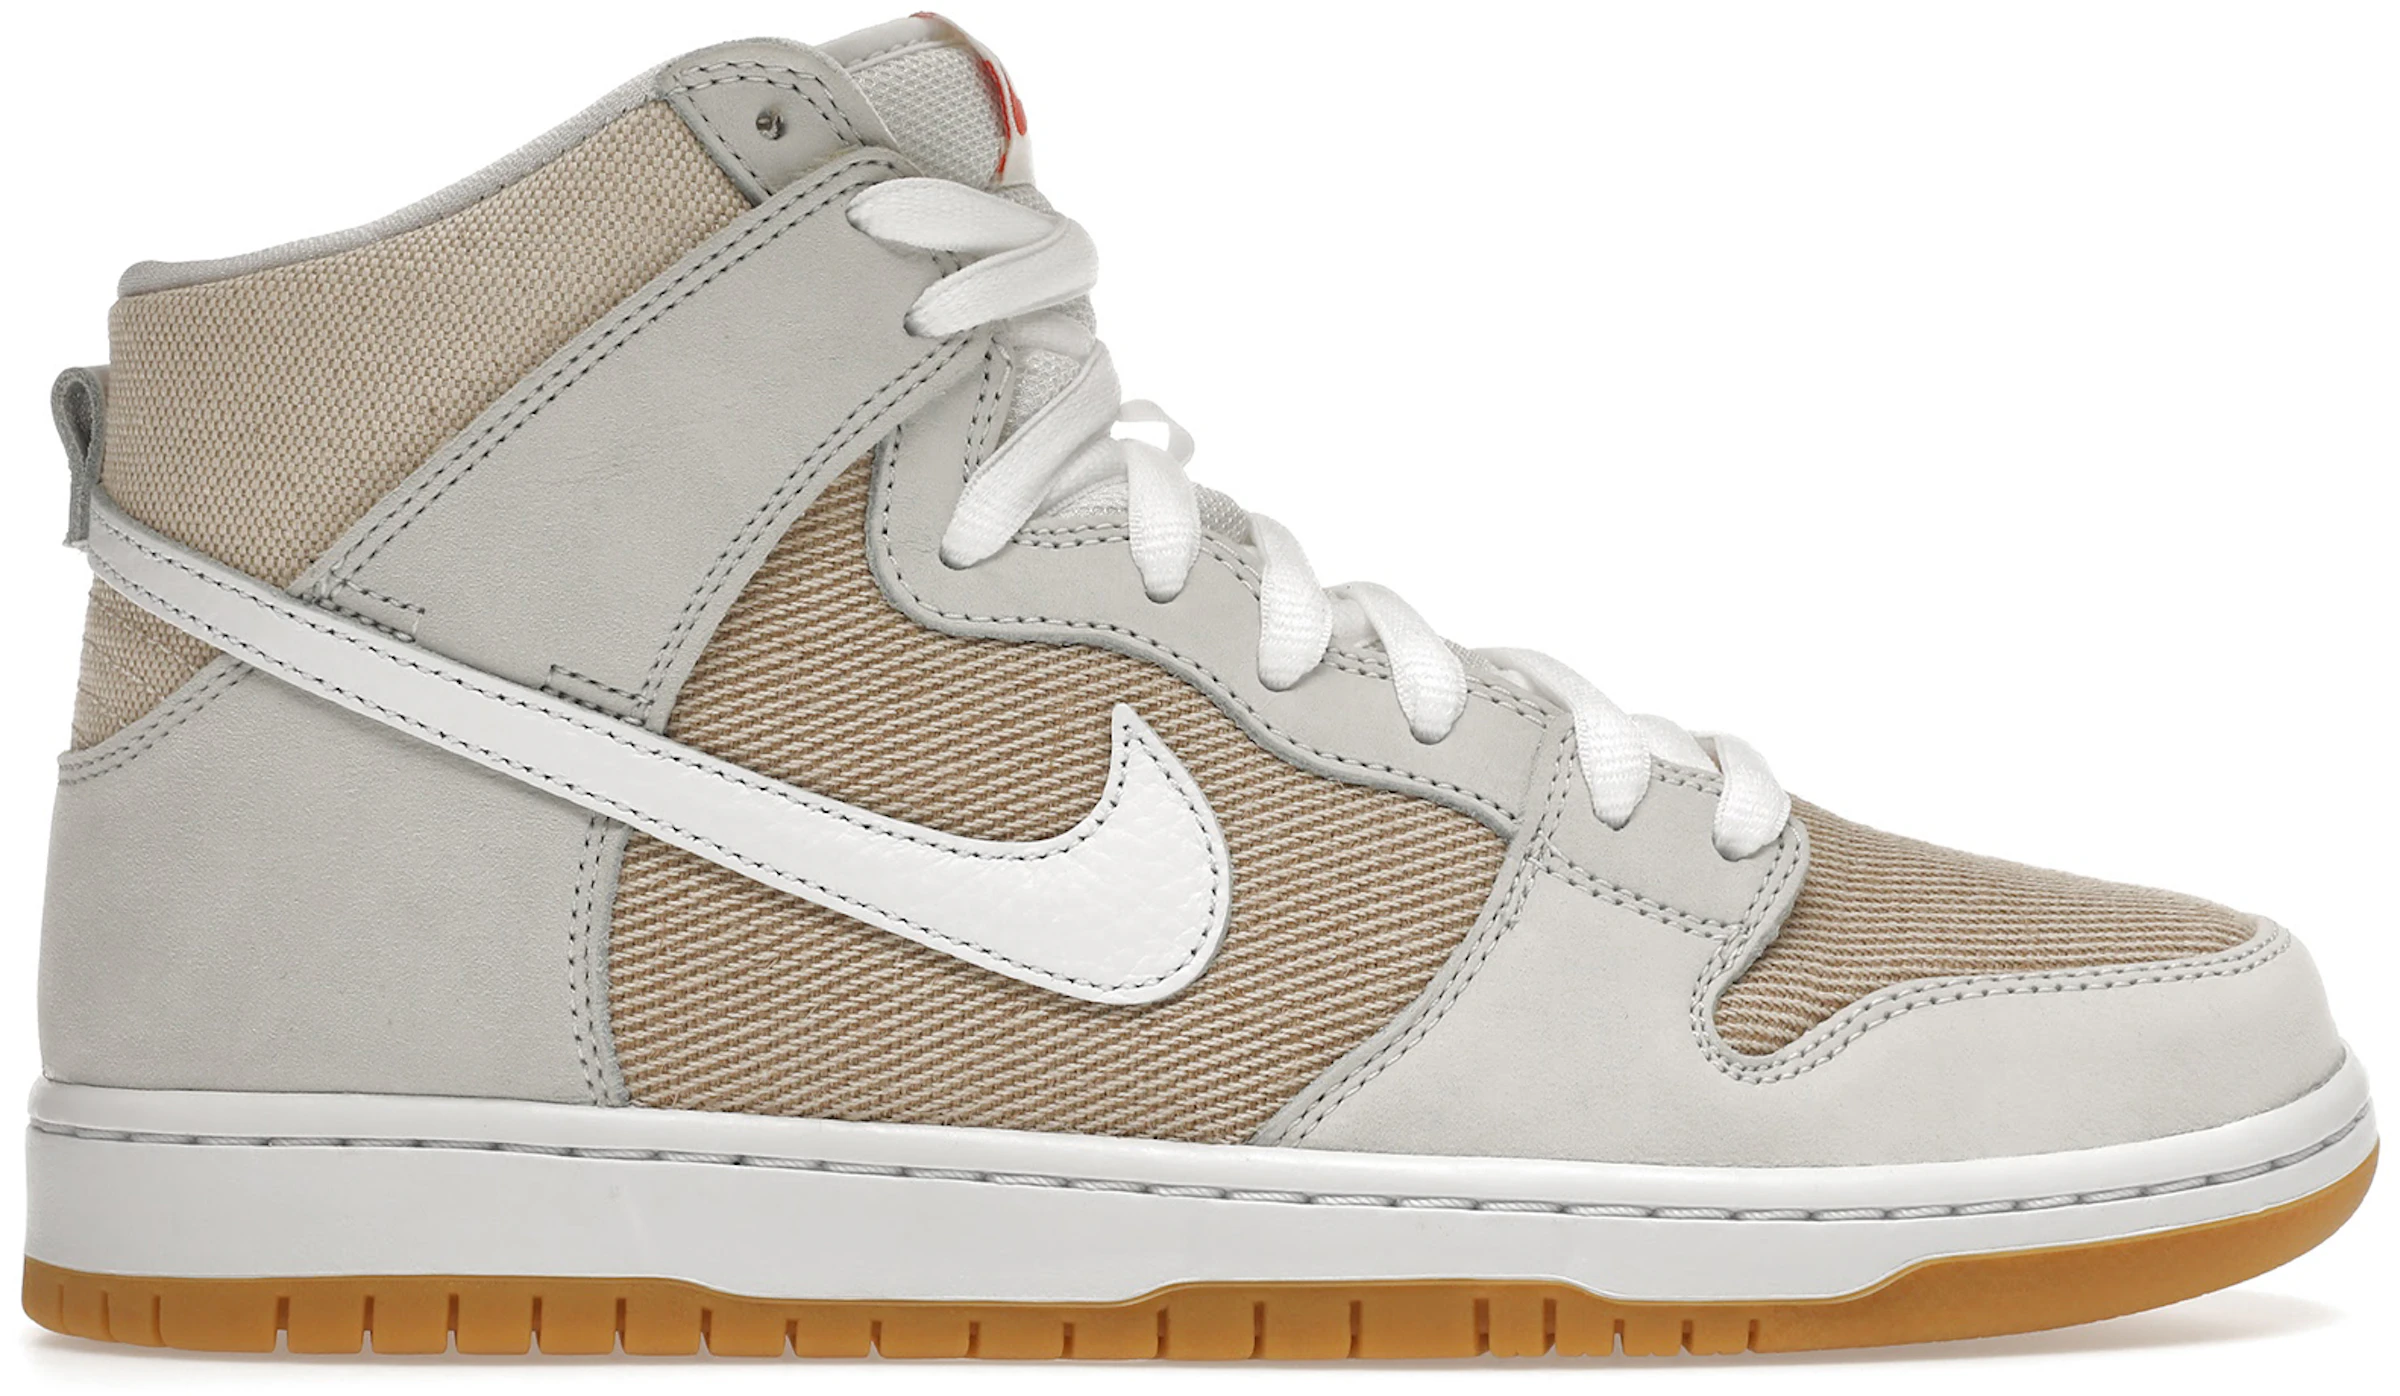 Nike SB Dunk High Pro ISO Label Unbleached Natural - DA9626-100 - US